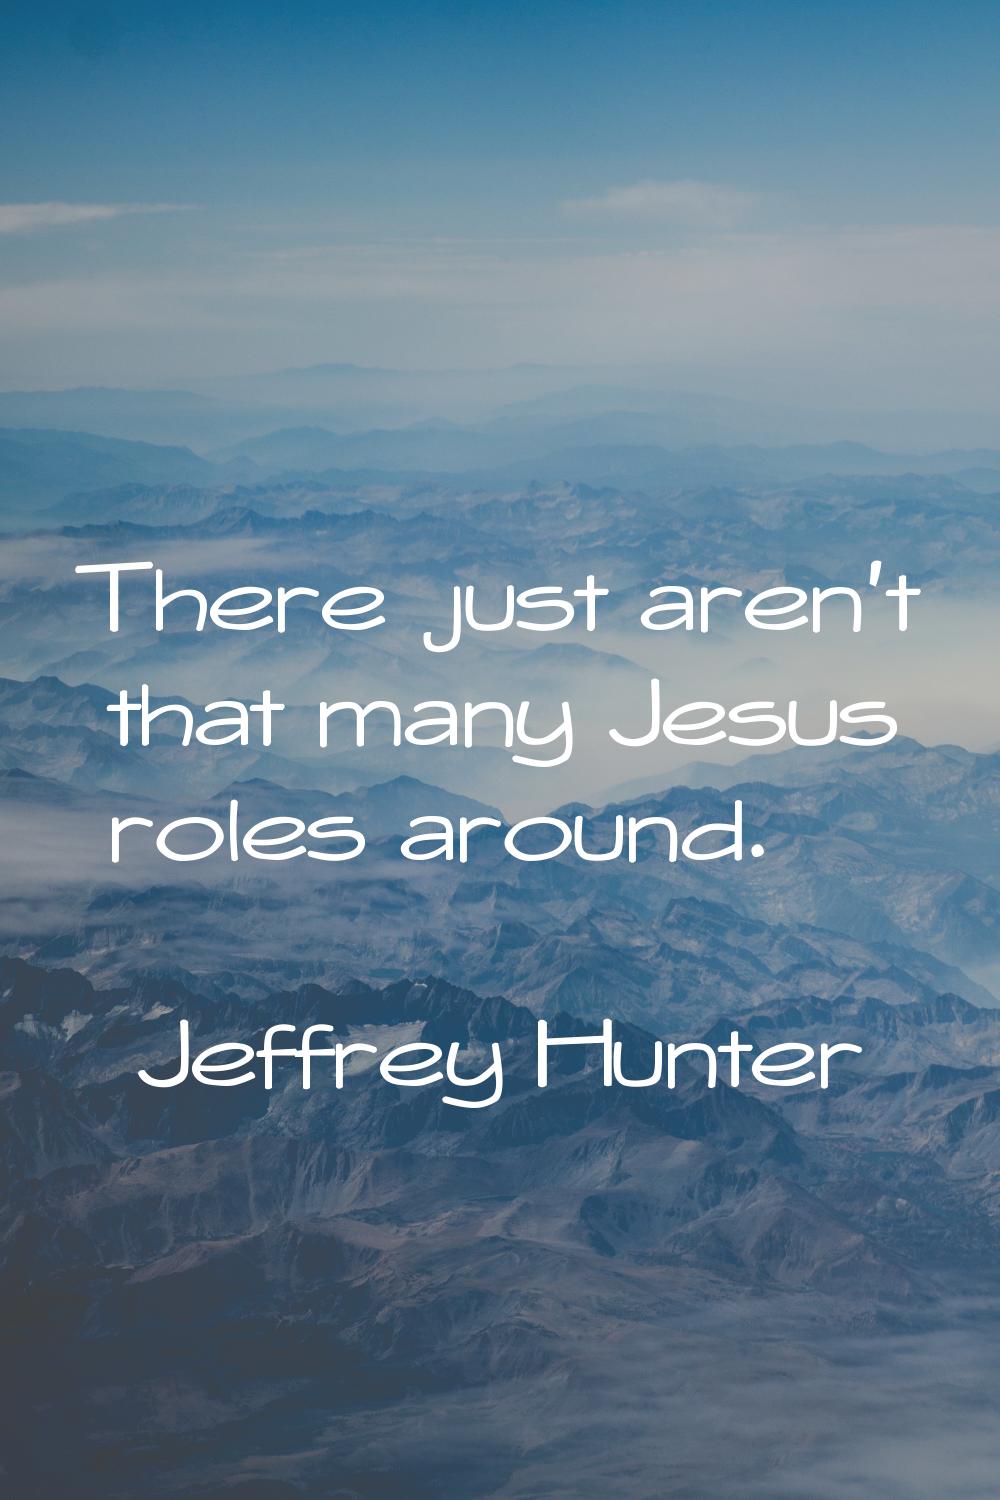 There just aren't that many Jesus roles around.